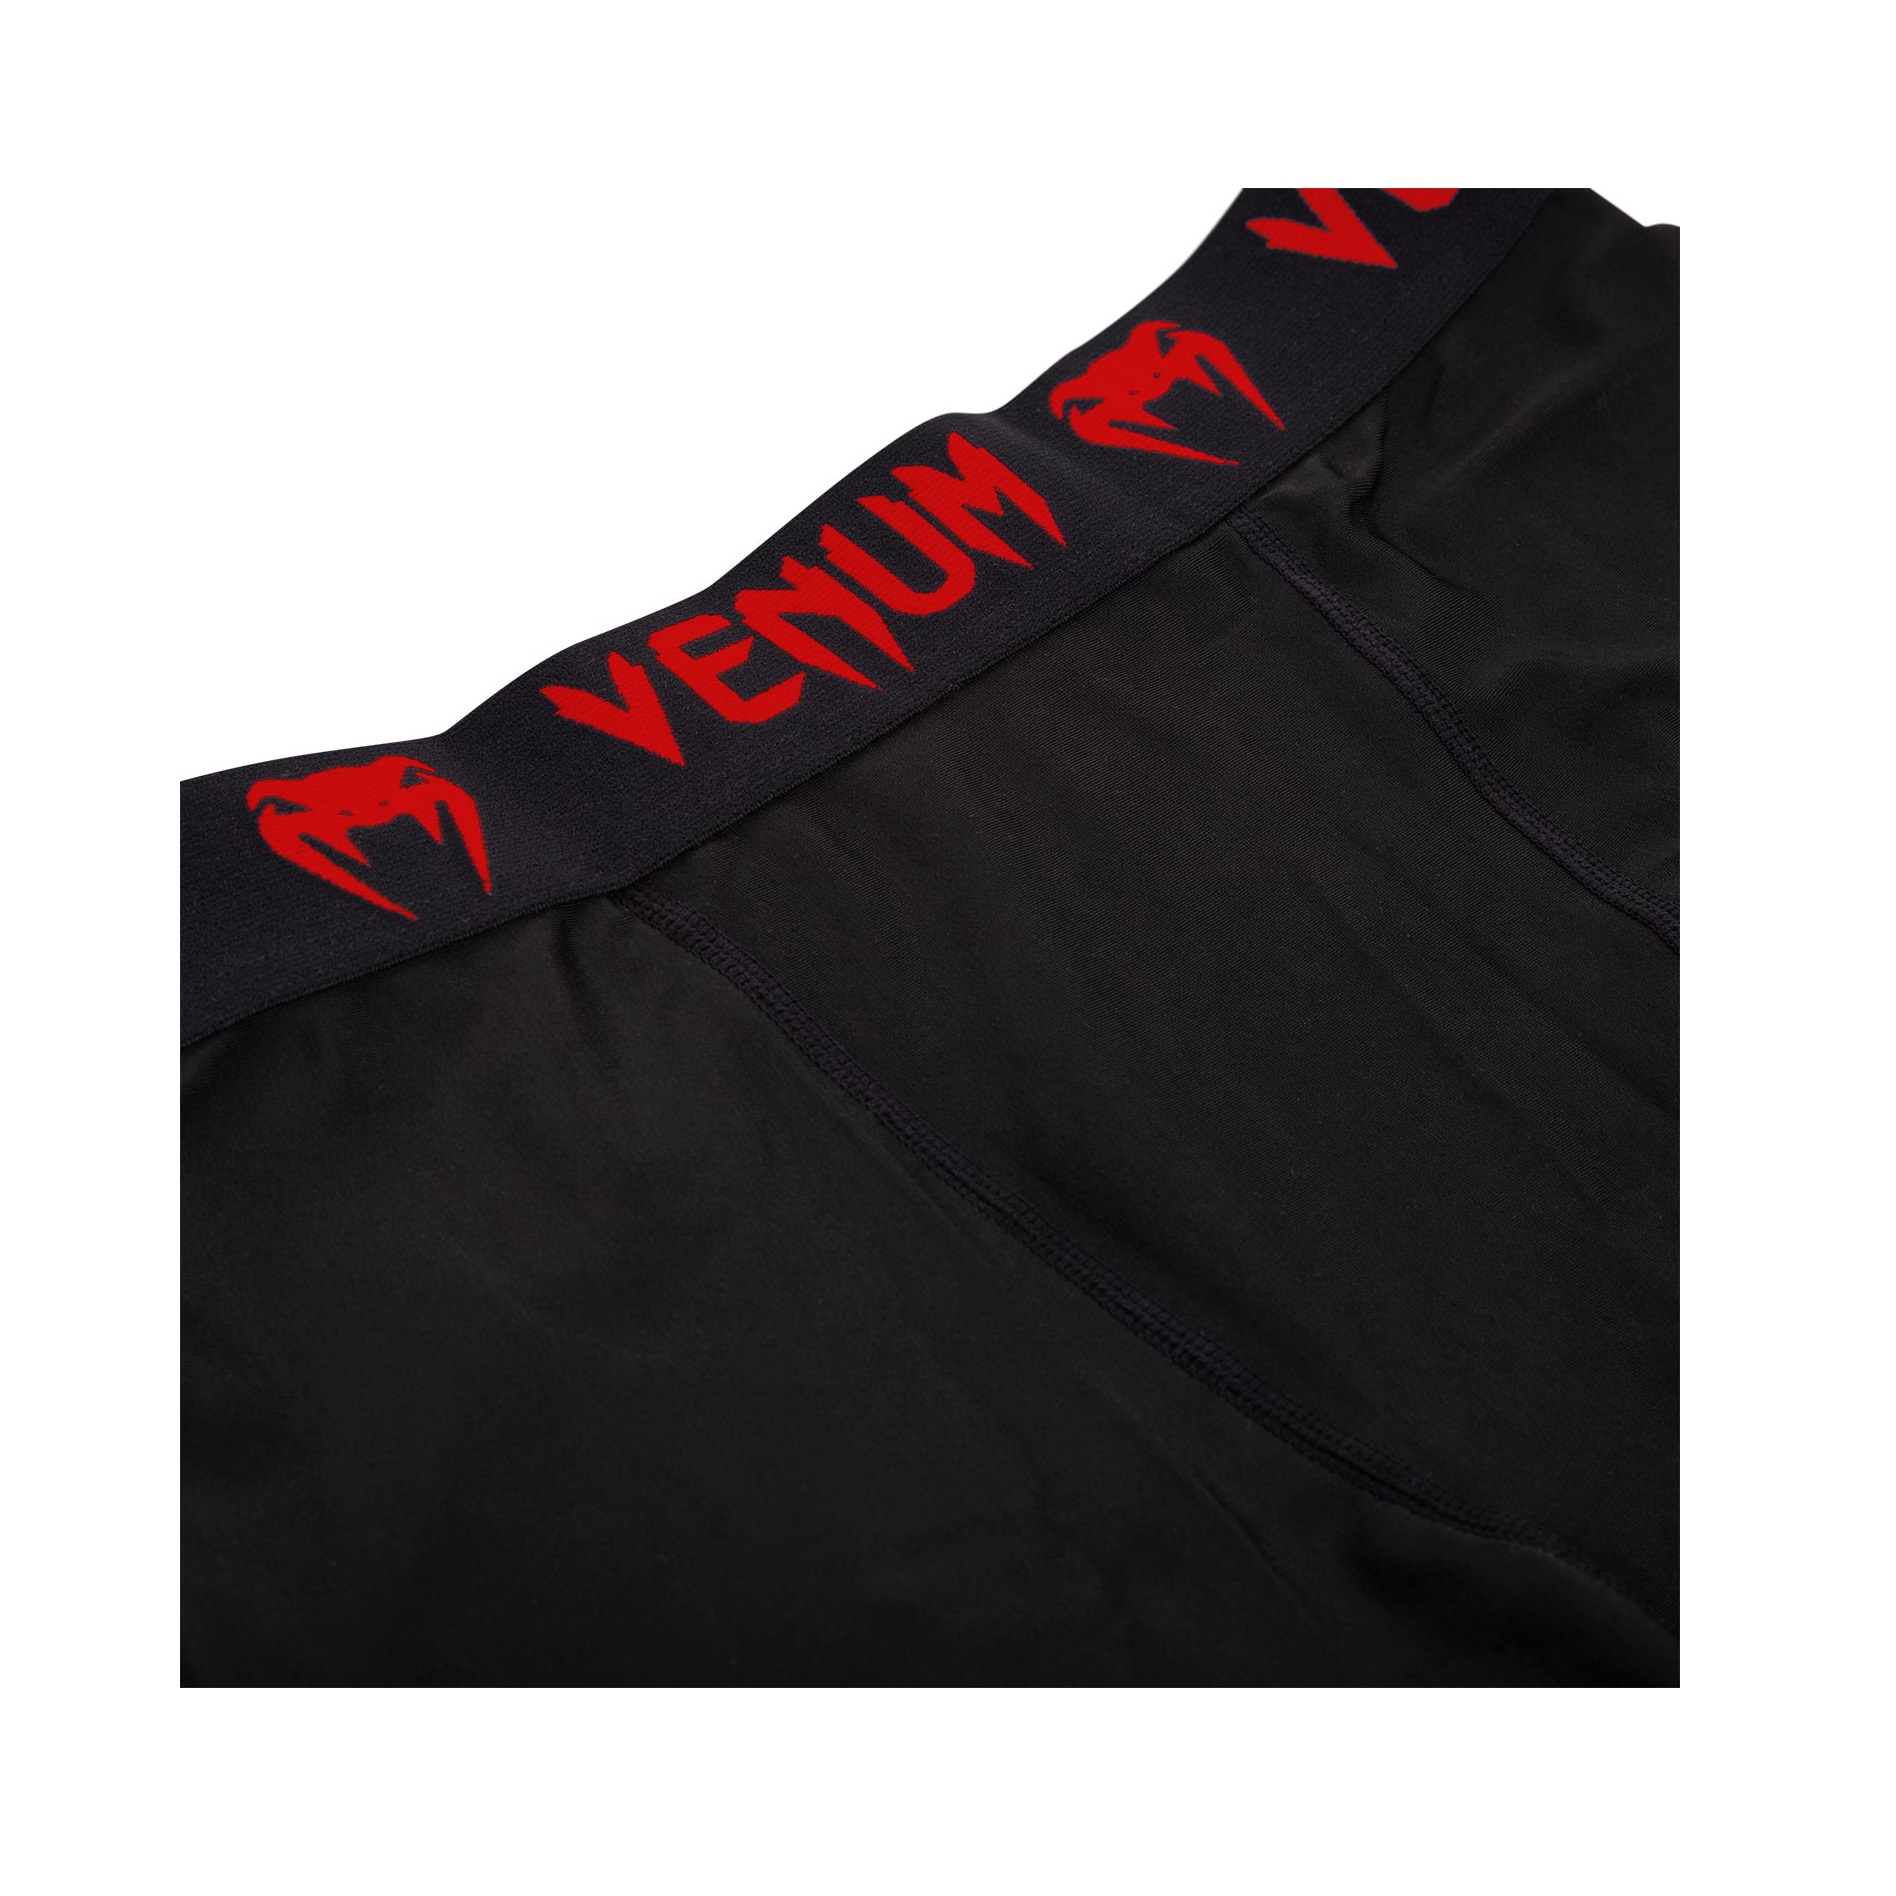 SPATS_CONTENDER_2_BLACK_RED_HD_07